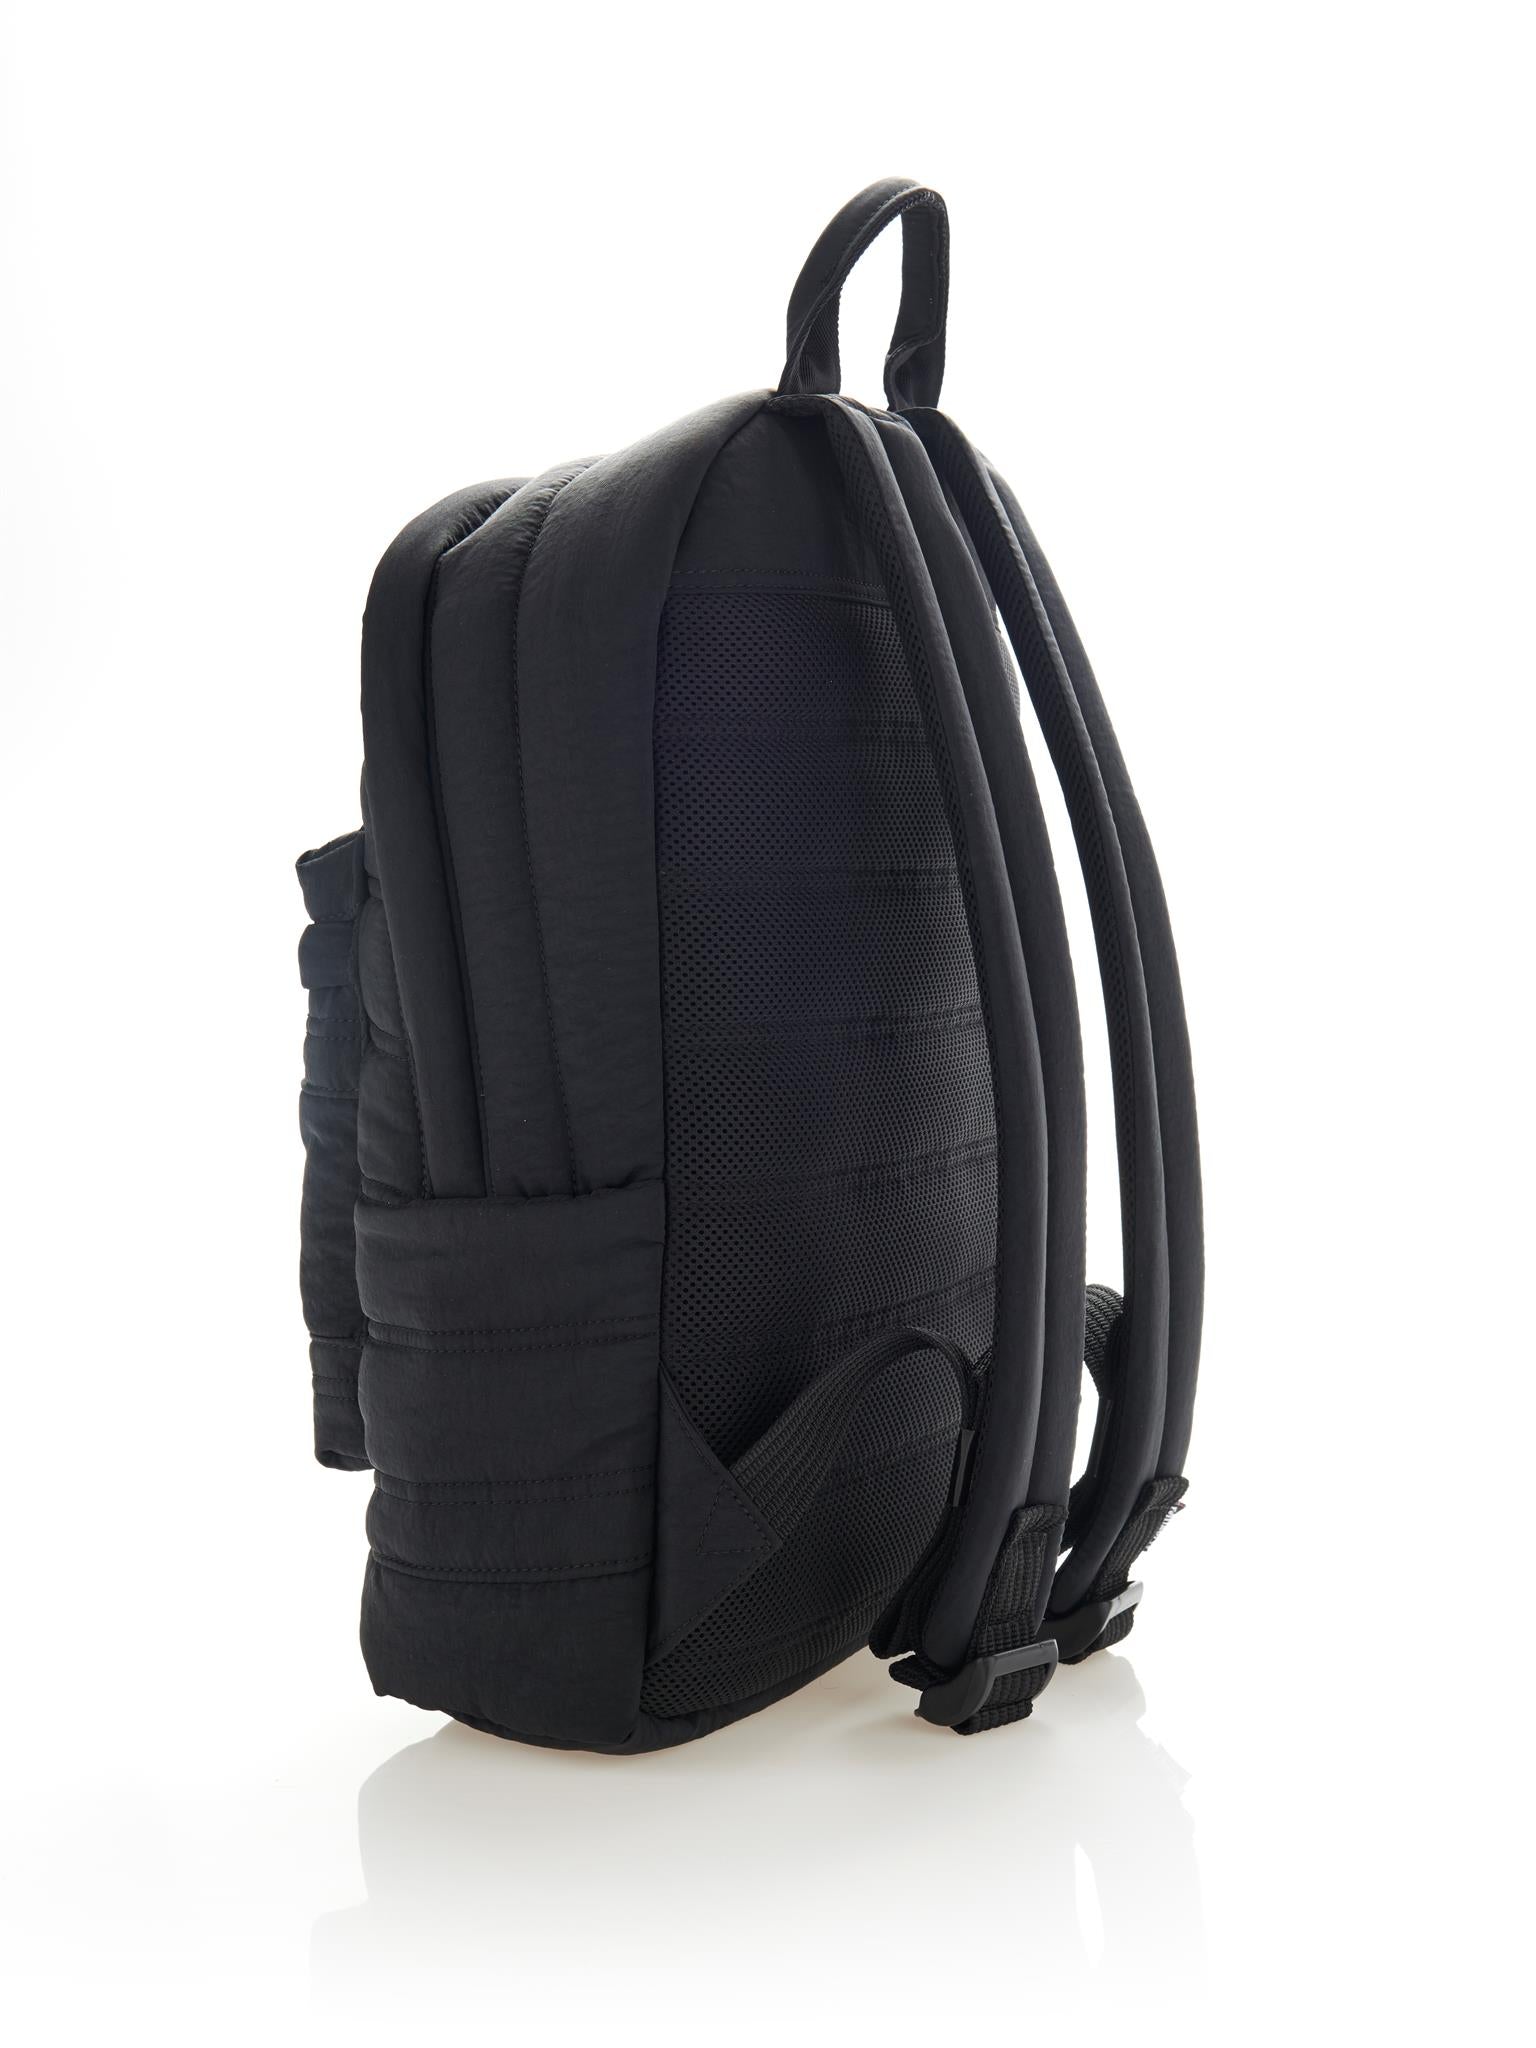 Mueslii original puffer laptop backpack made of high density nylon and Ykk zips, color matte black, side view, fits laptop/ tablet up to 15".